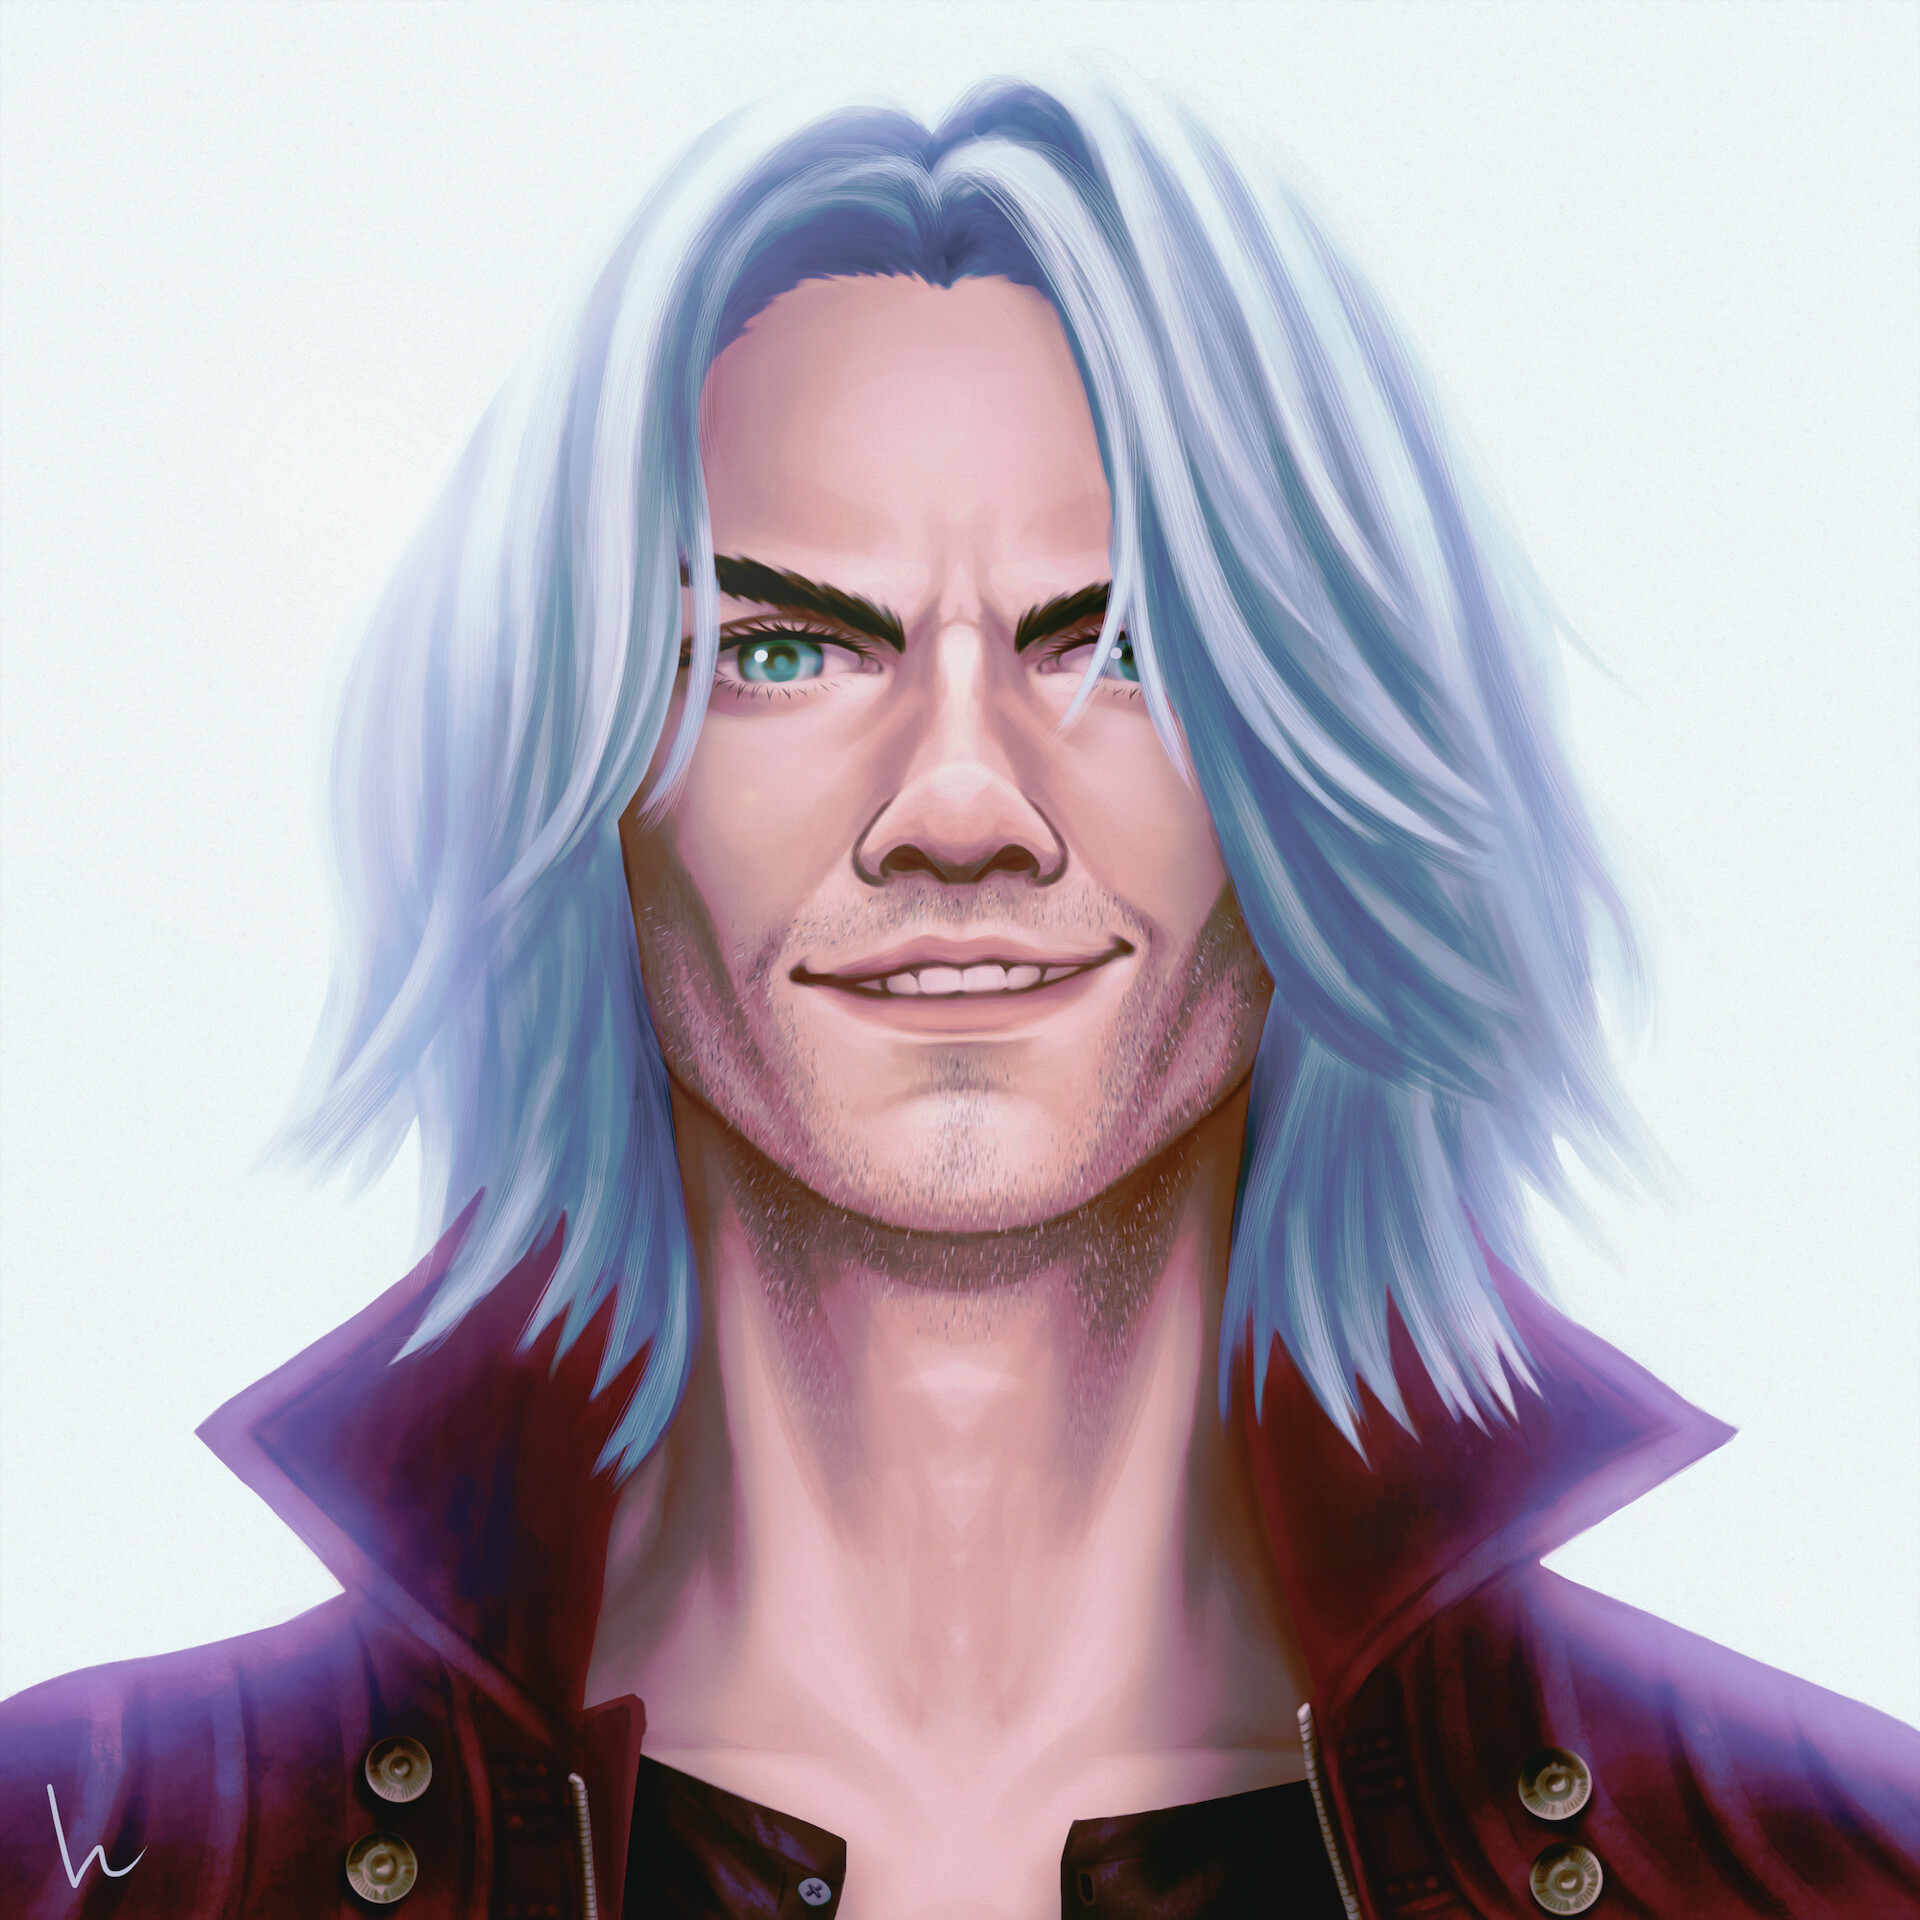 I made this in 2 hours - - - - - #dmc #dmc5 #devilmaycry